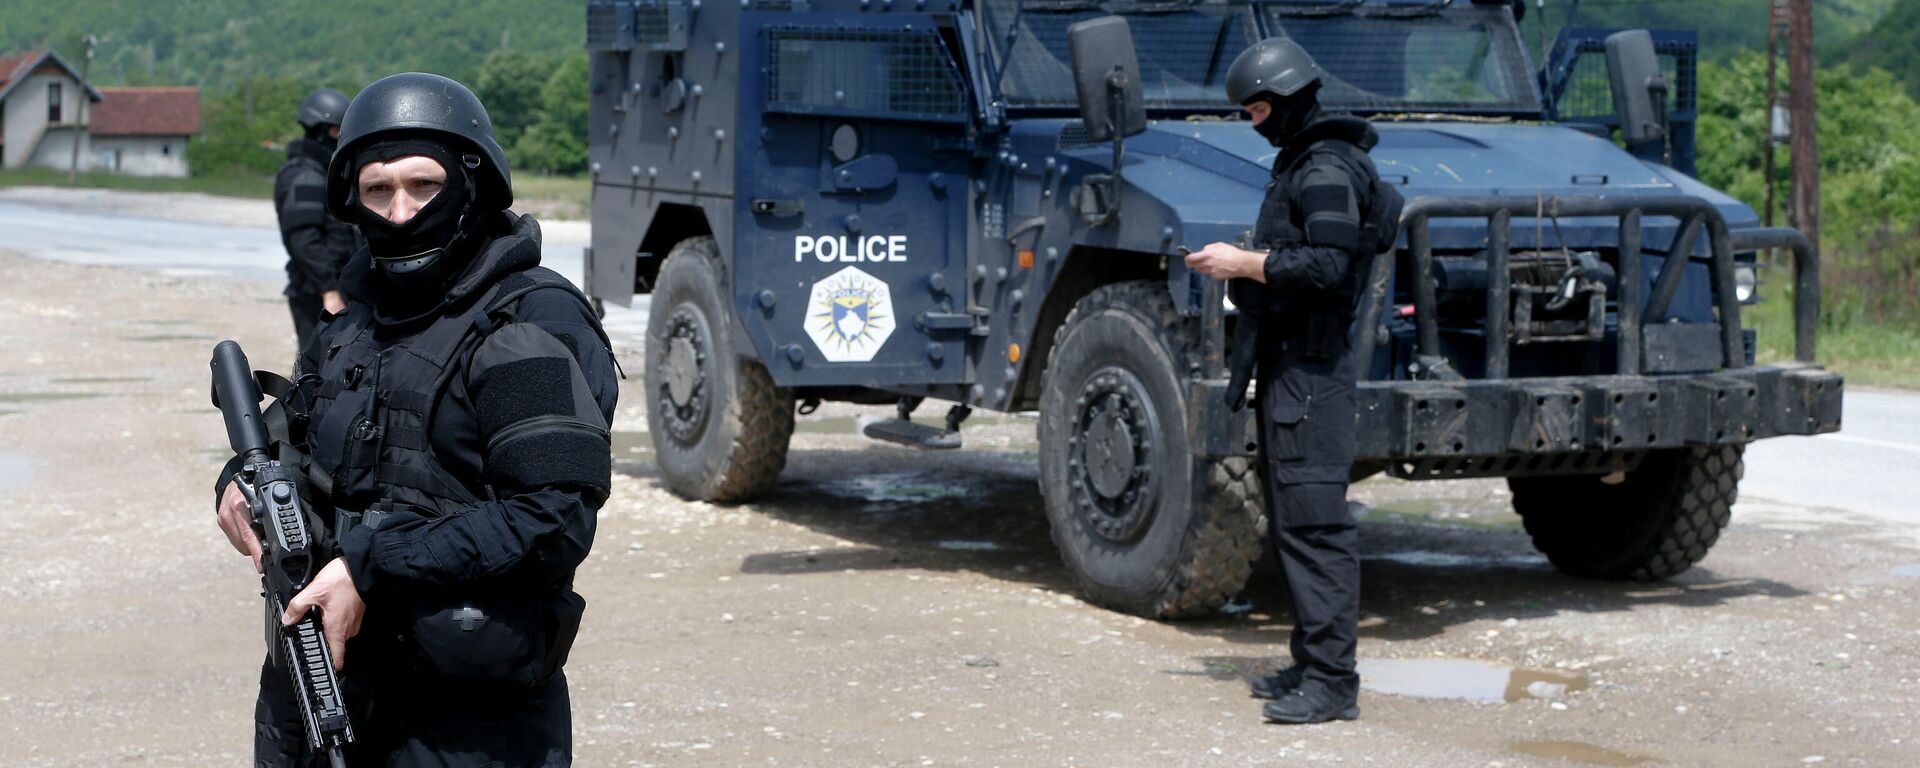 Kosovo police special unit members secure the area near the village of Cabra, north western Kosovo, during an ongoing police operation on Tuesday, May 28, 2019. - Sputnik International, 1920, 27.08.2022